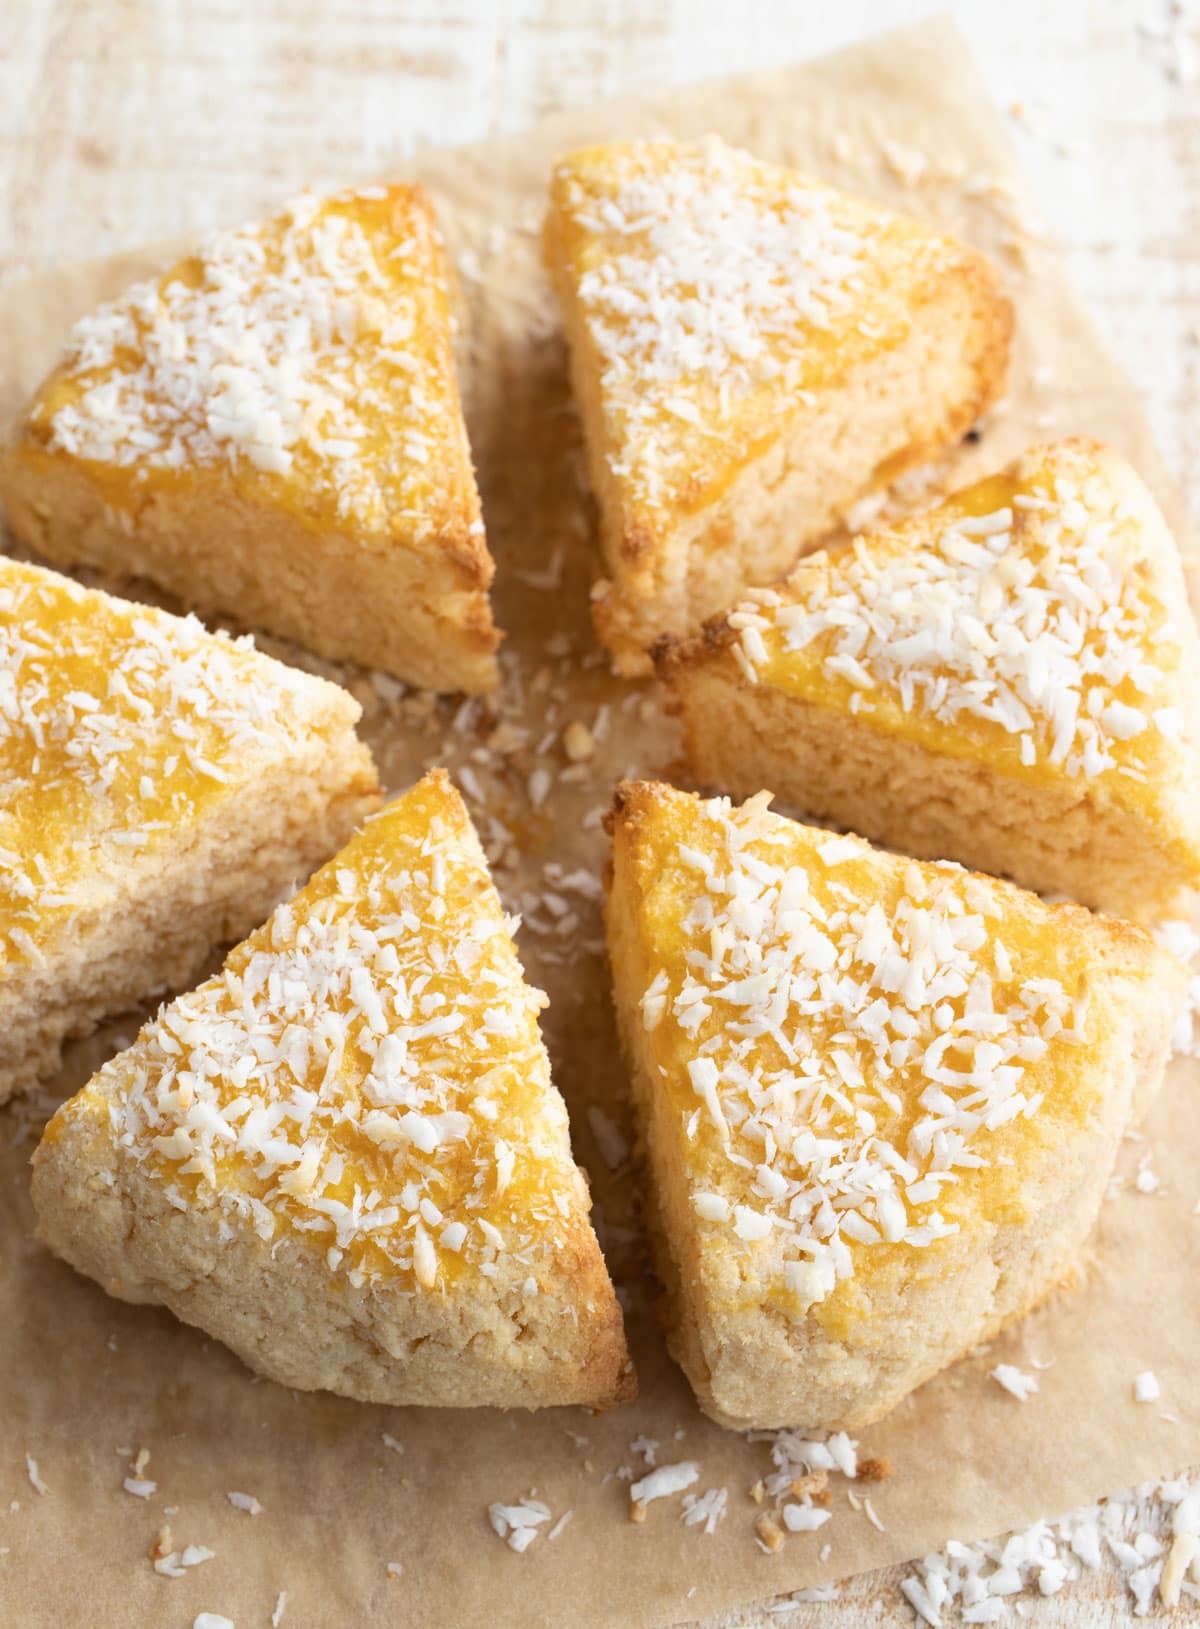 Coconut scones arranged in ta circle on parchment paper.